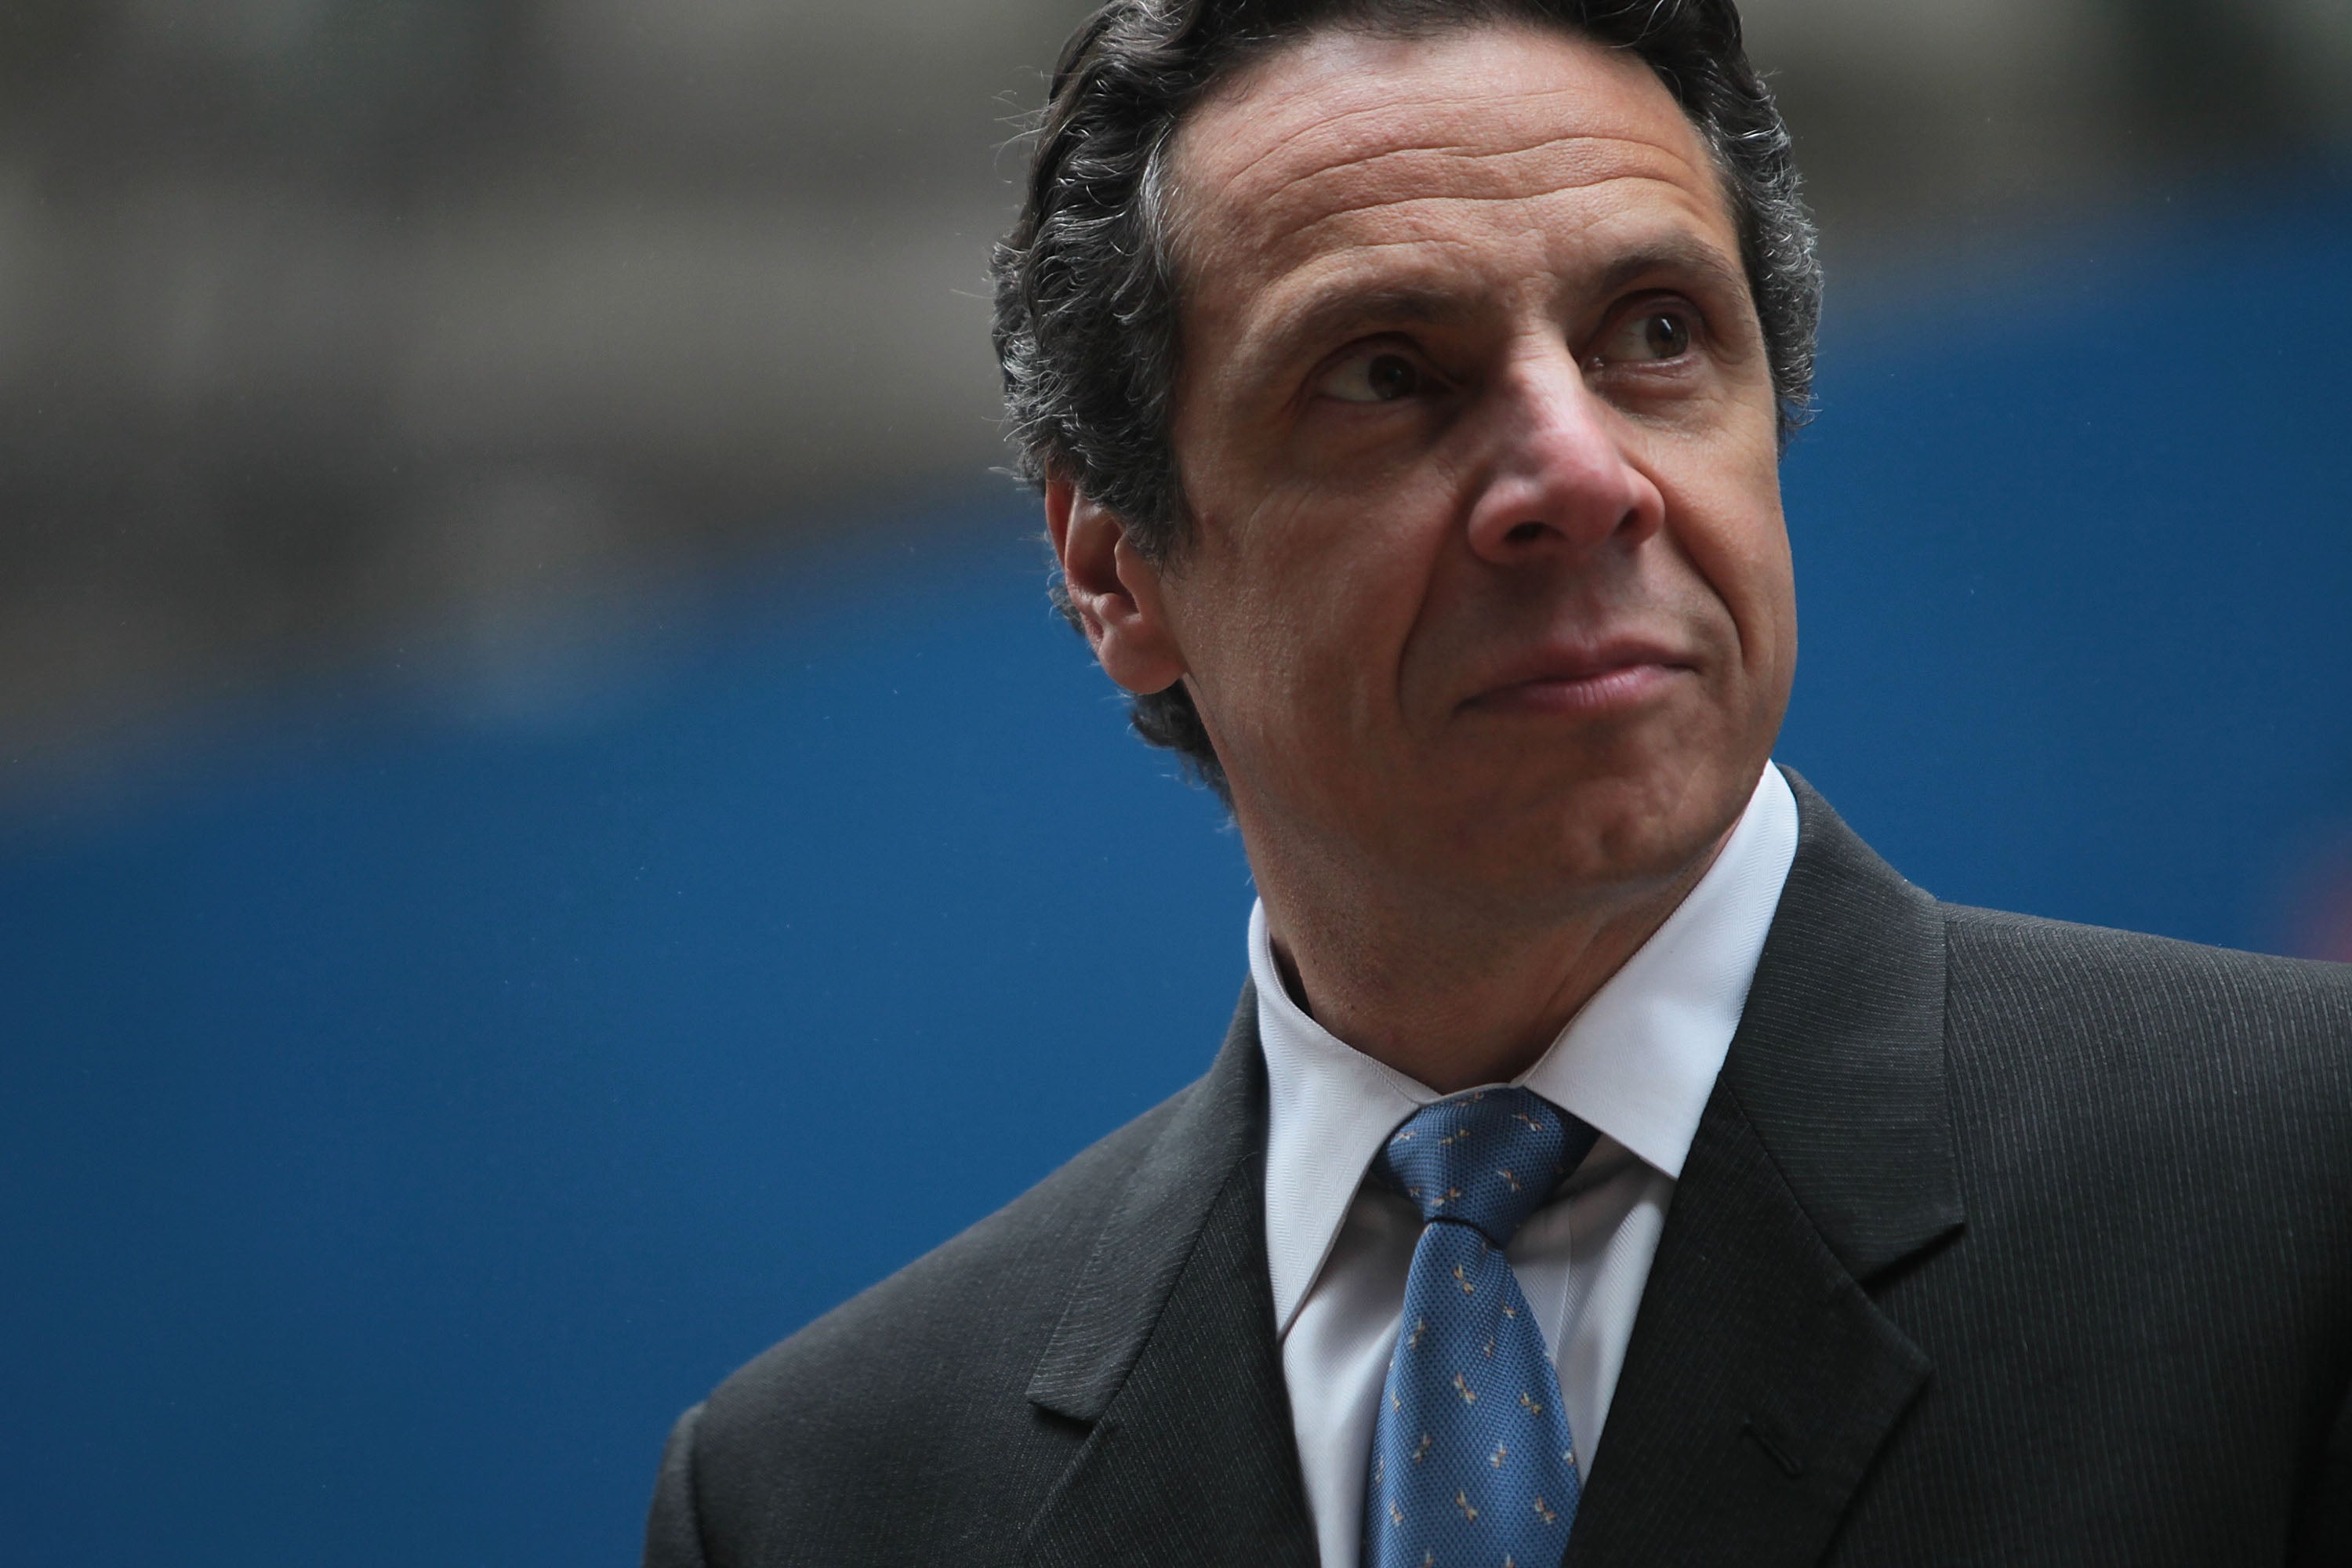 Several of Mr Cuomo’s former aides have accused him of sexual harassment